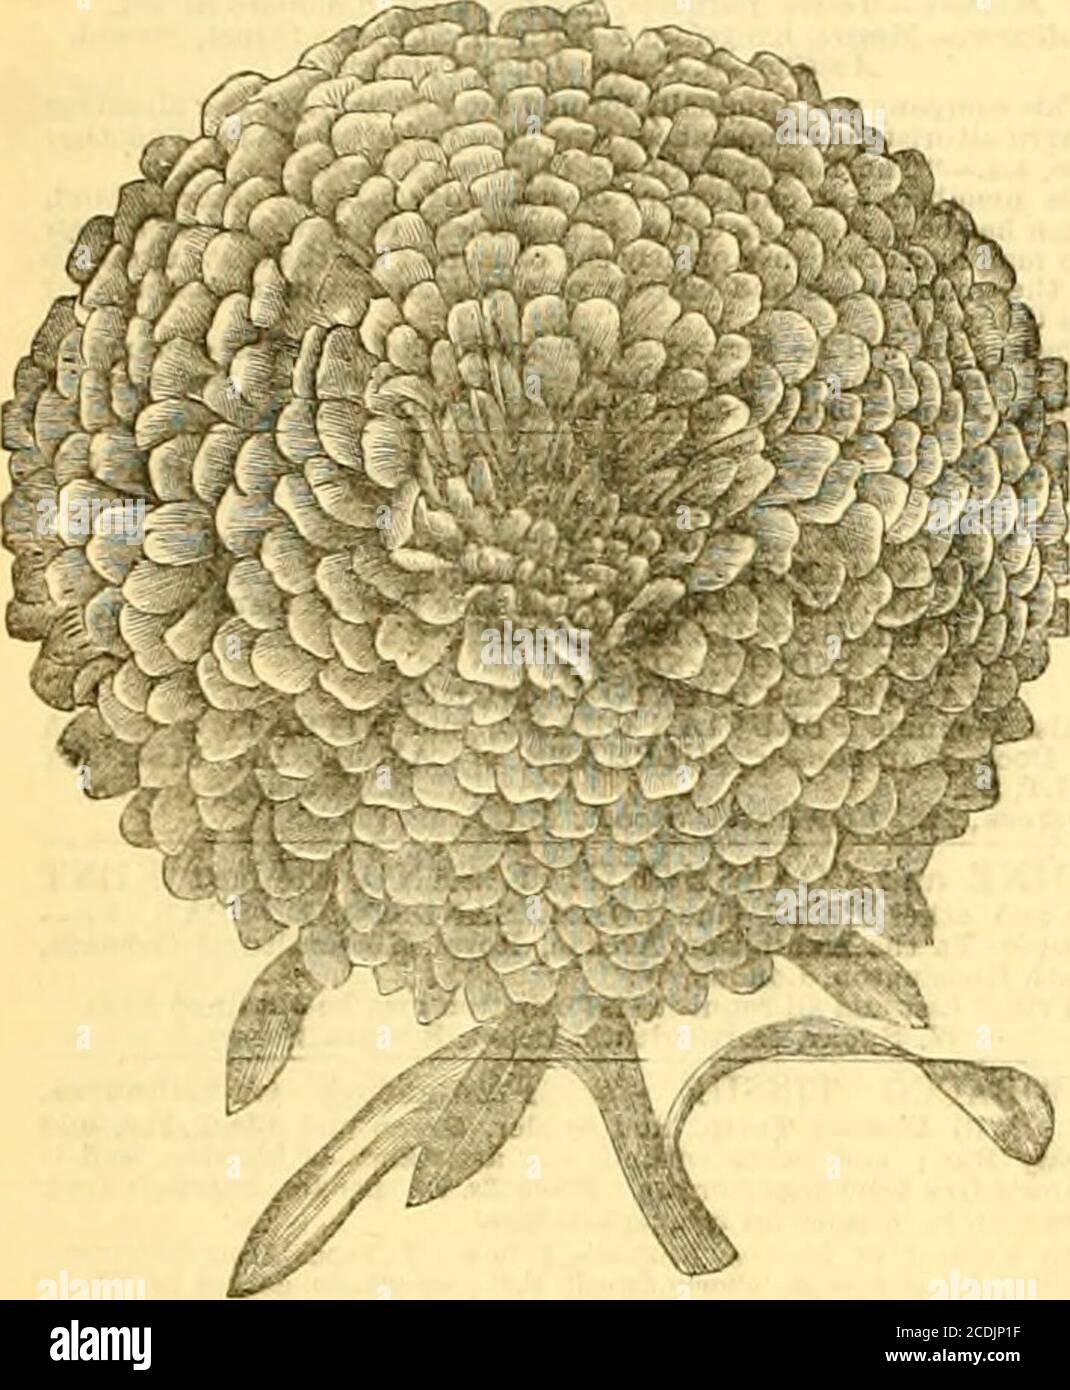 . The Gardeners' chronicle and agricultural gazette . CINERARIA. Is., 2s. 6d.. and 6s.PRIMULA SINENSIS FIMBRIATA RUBRA. 2s. 6d. and 6s.ALBA. 2s. 6rf. and 63.niuxed. Is., 2s. Gci., and 5s. I Sons, Woodlands Nursery, Isleworth, W. Bedding Pla&ts for the Million. JAMES HijLUEK can supply Scarlet and VariepatedGERANIUMS, CALCEOLARIAS. VERBENAS. DAHLIAS,SALVIAS. FUCHSIAS. HELIOTROPES, GAZANIAS. AGERA-TUMS, CUPHEAS. KCENIGIAS, LOBELIAS, Ac. strong plants,eight dozen for 20s., or tour ^ozepfV -- - - Established 1S06. THOMAS HANDASYDE and DAVIDSONexecuting Orders for HERBACEOUS and ALPINE PLANTSof eve Stock Photo